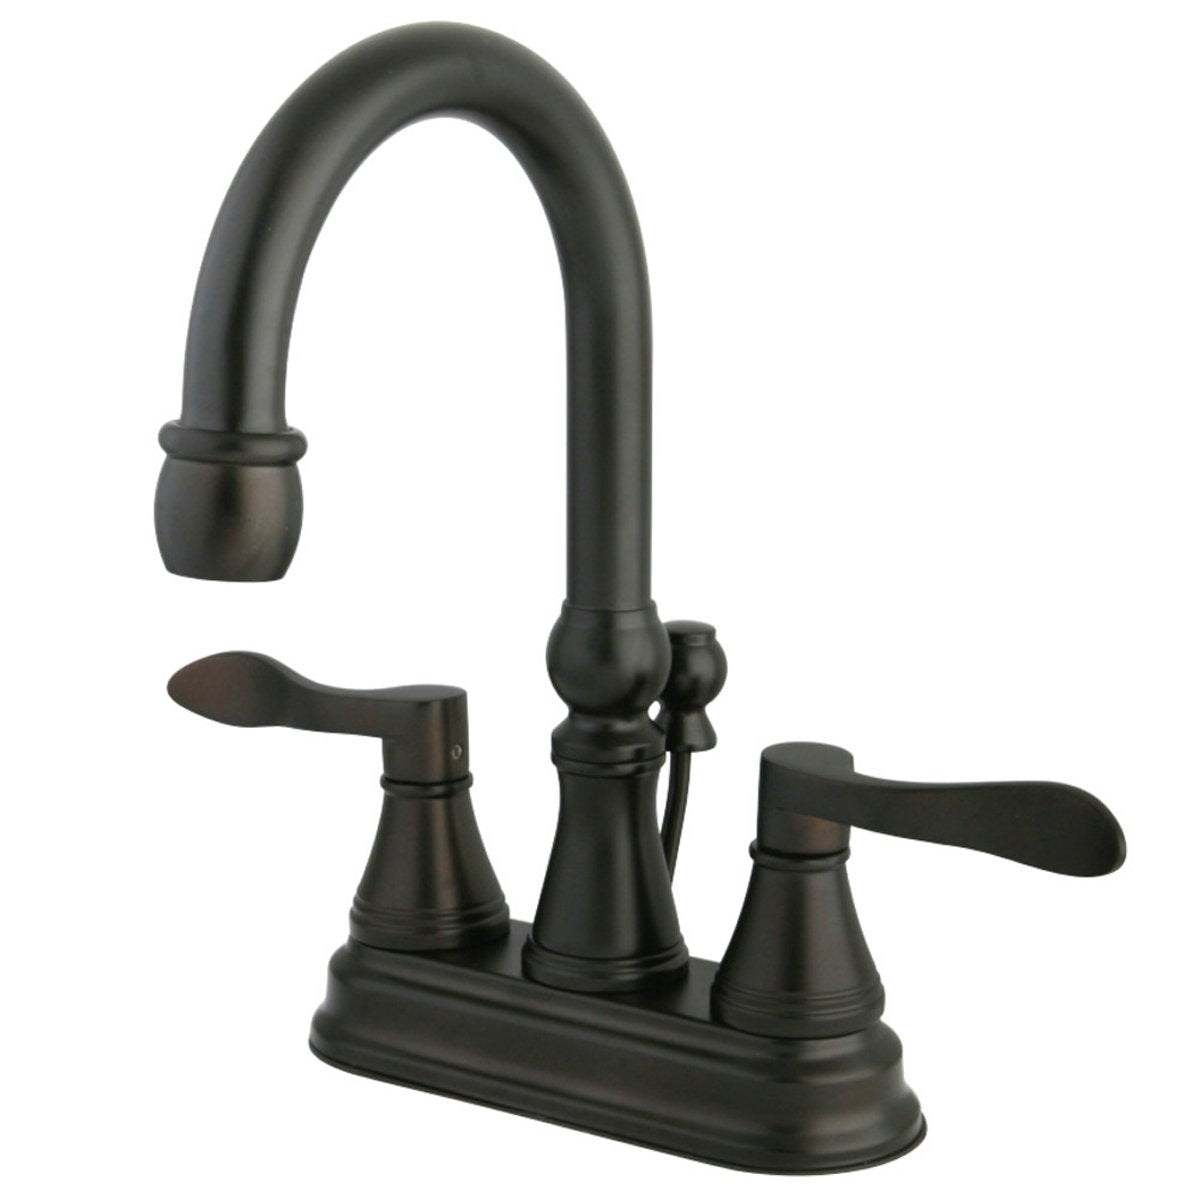 Kingston Brass NuFrench 4-Inch Centerset Bathroom Faucet